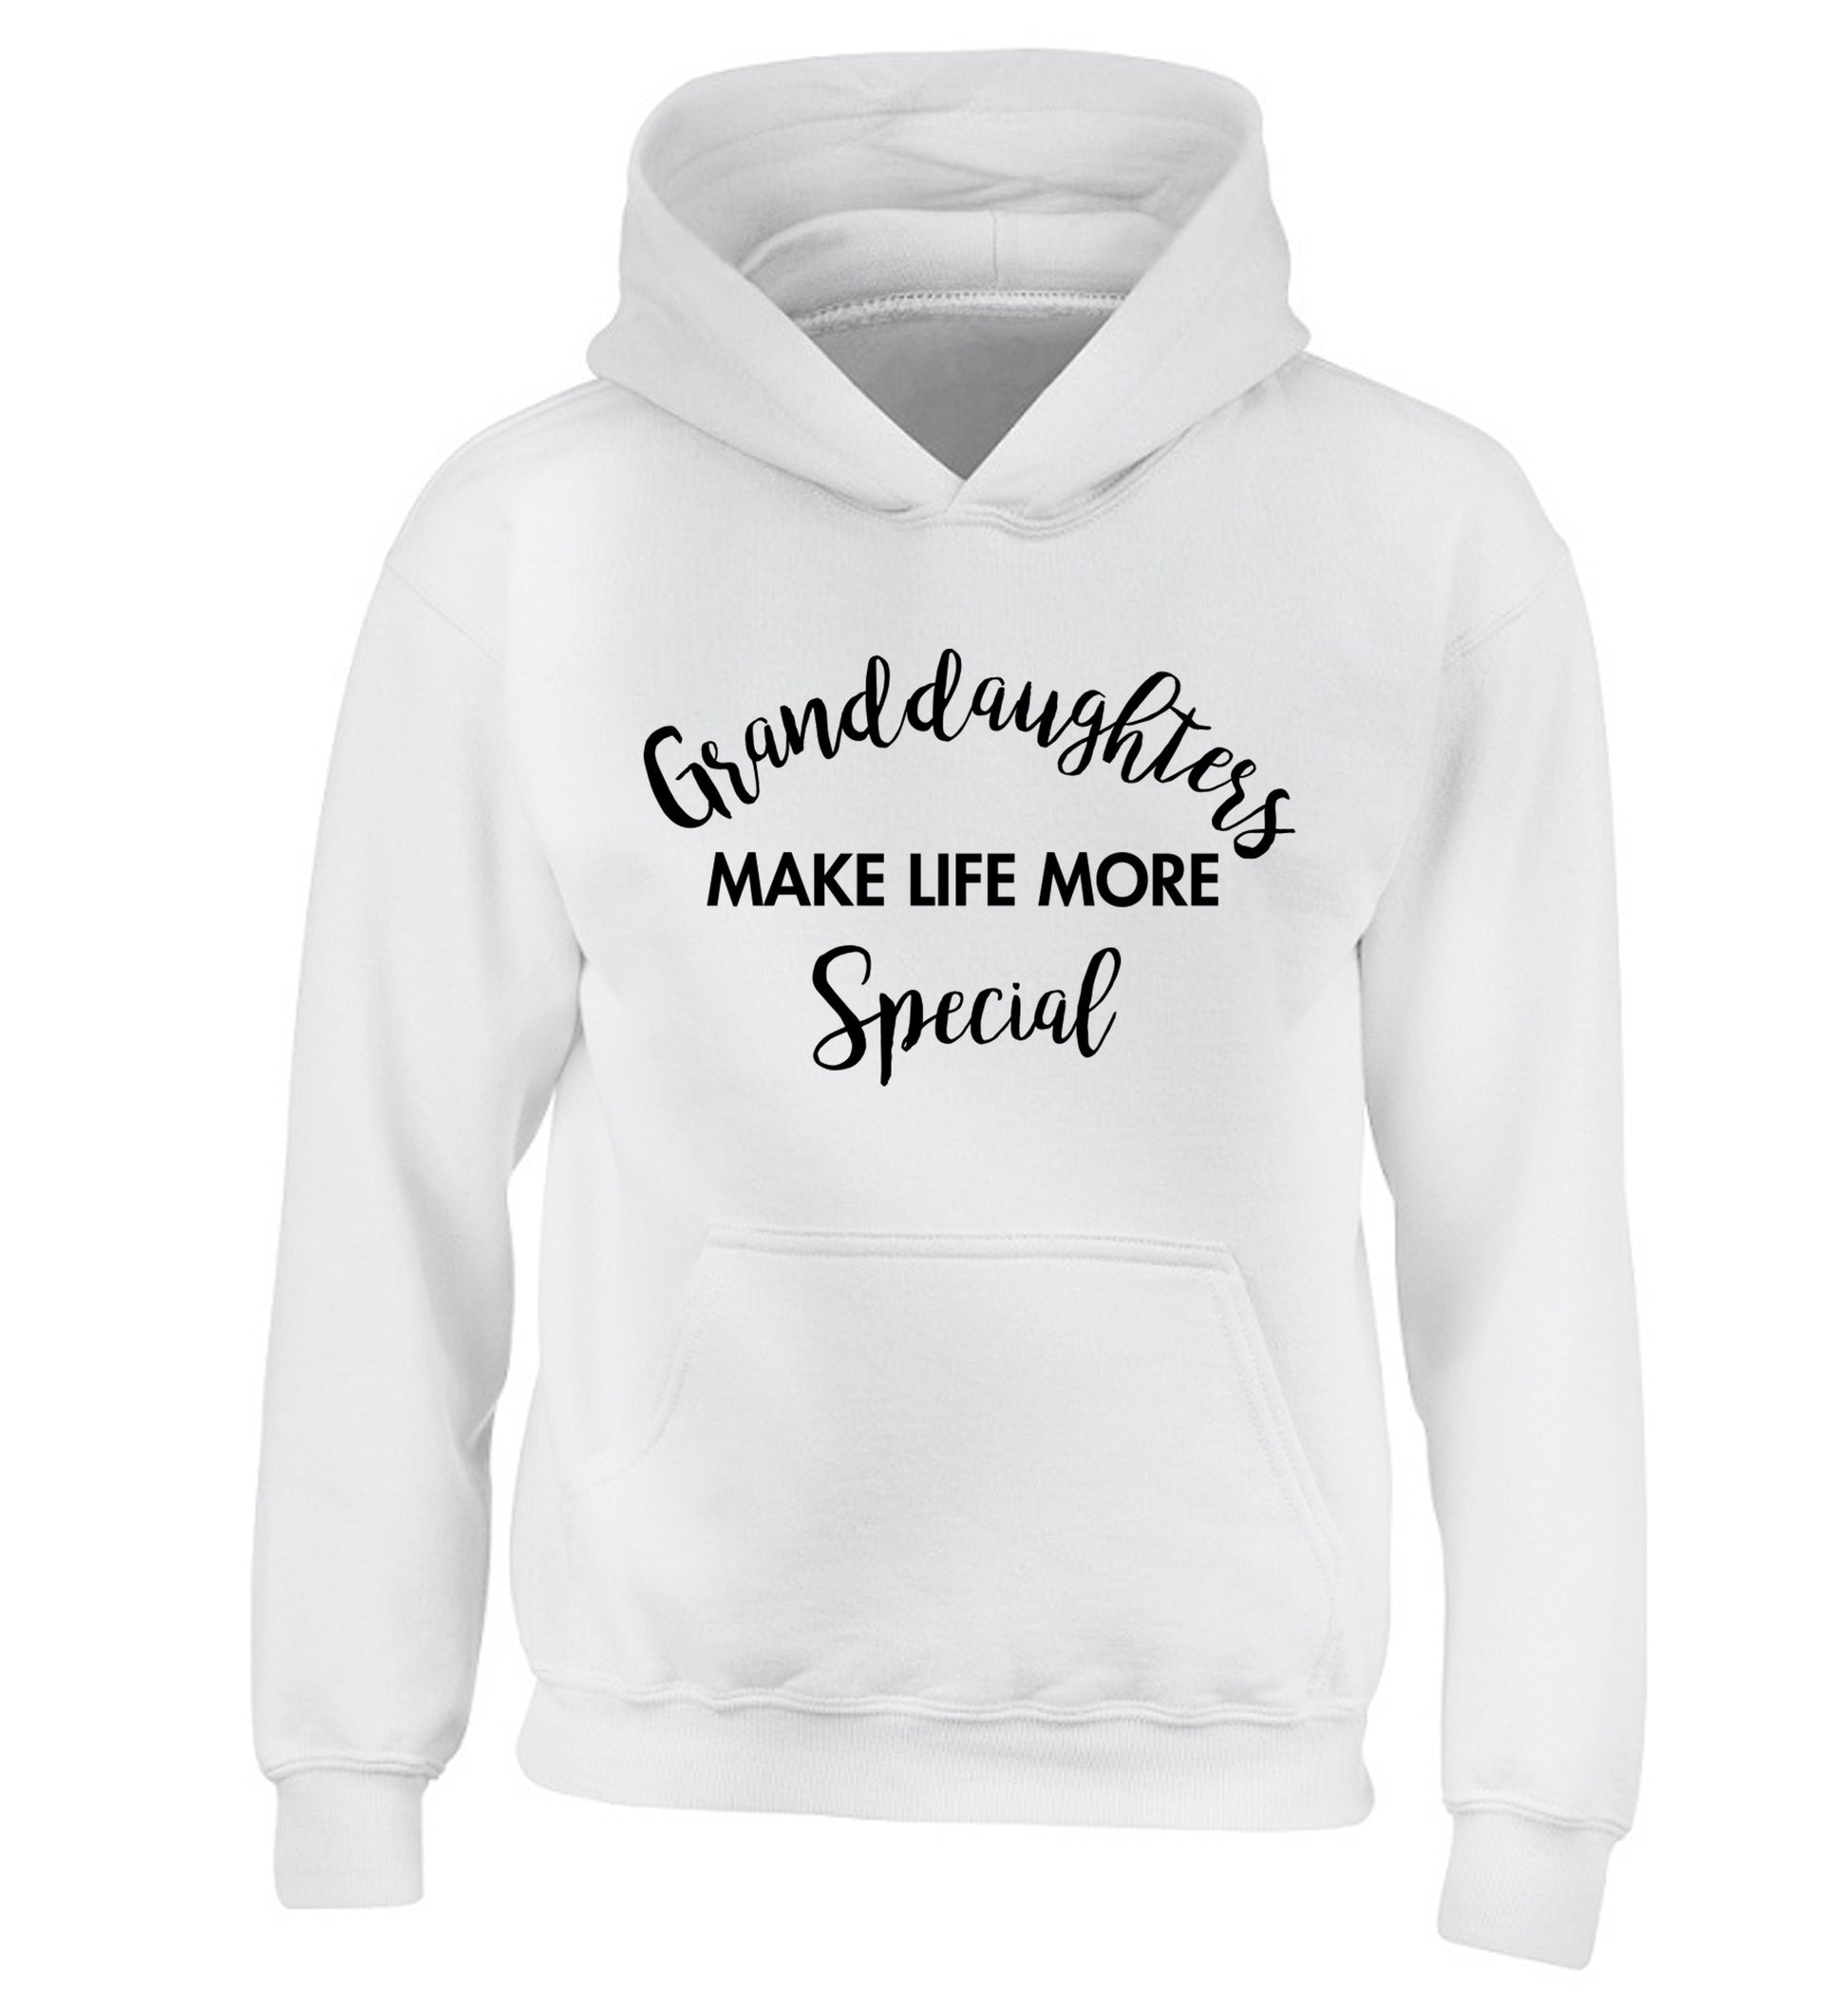 Granddaughters make life more special children's white hoodie 12-14 Years